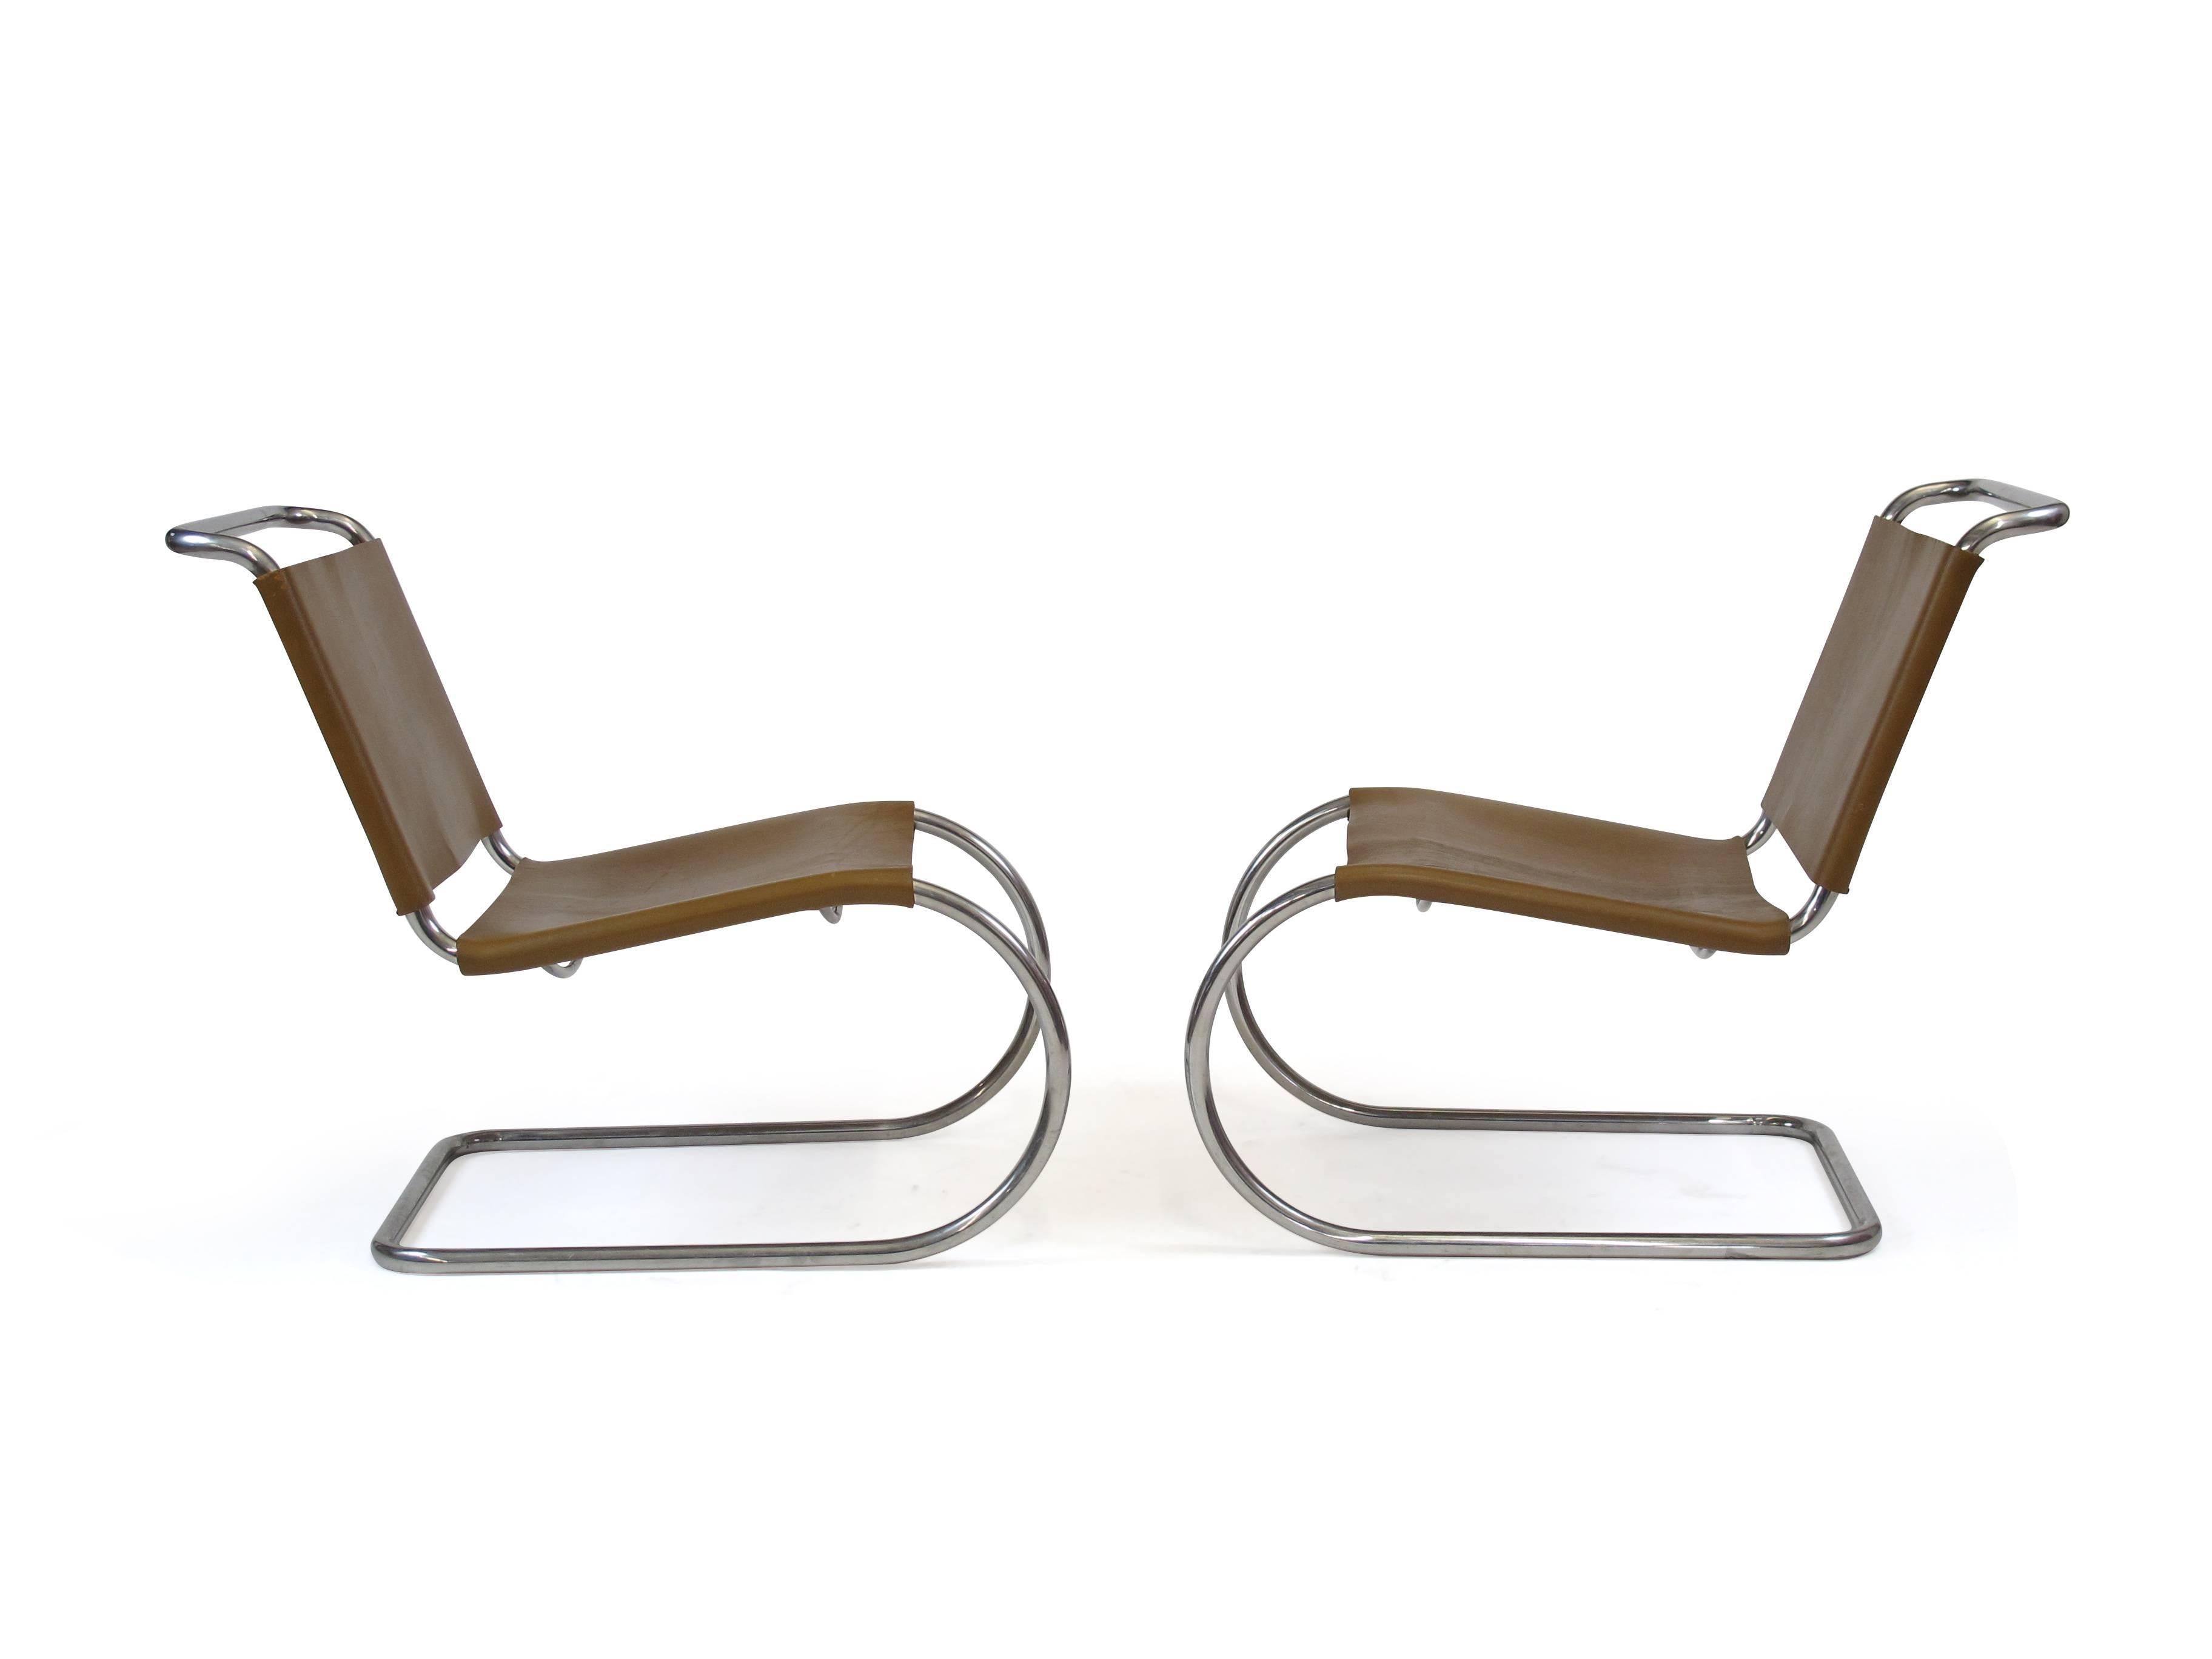 American  Mies van der Rohe MR Lounge Chairs for Knoll